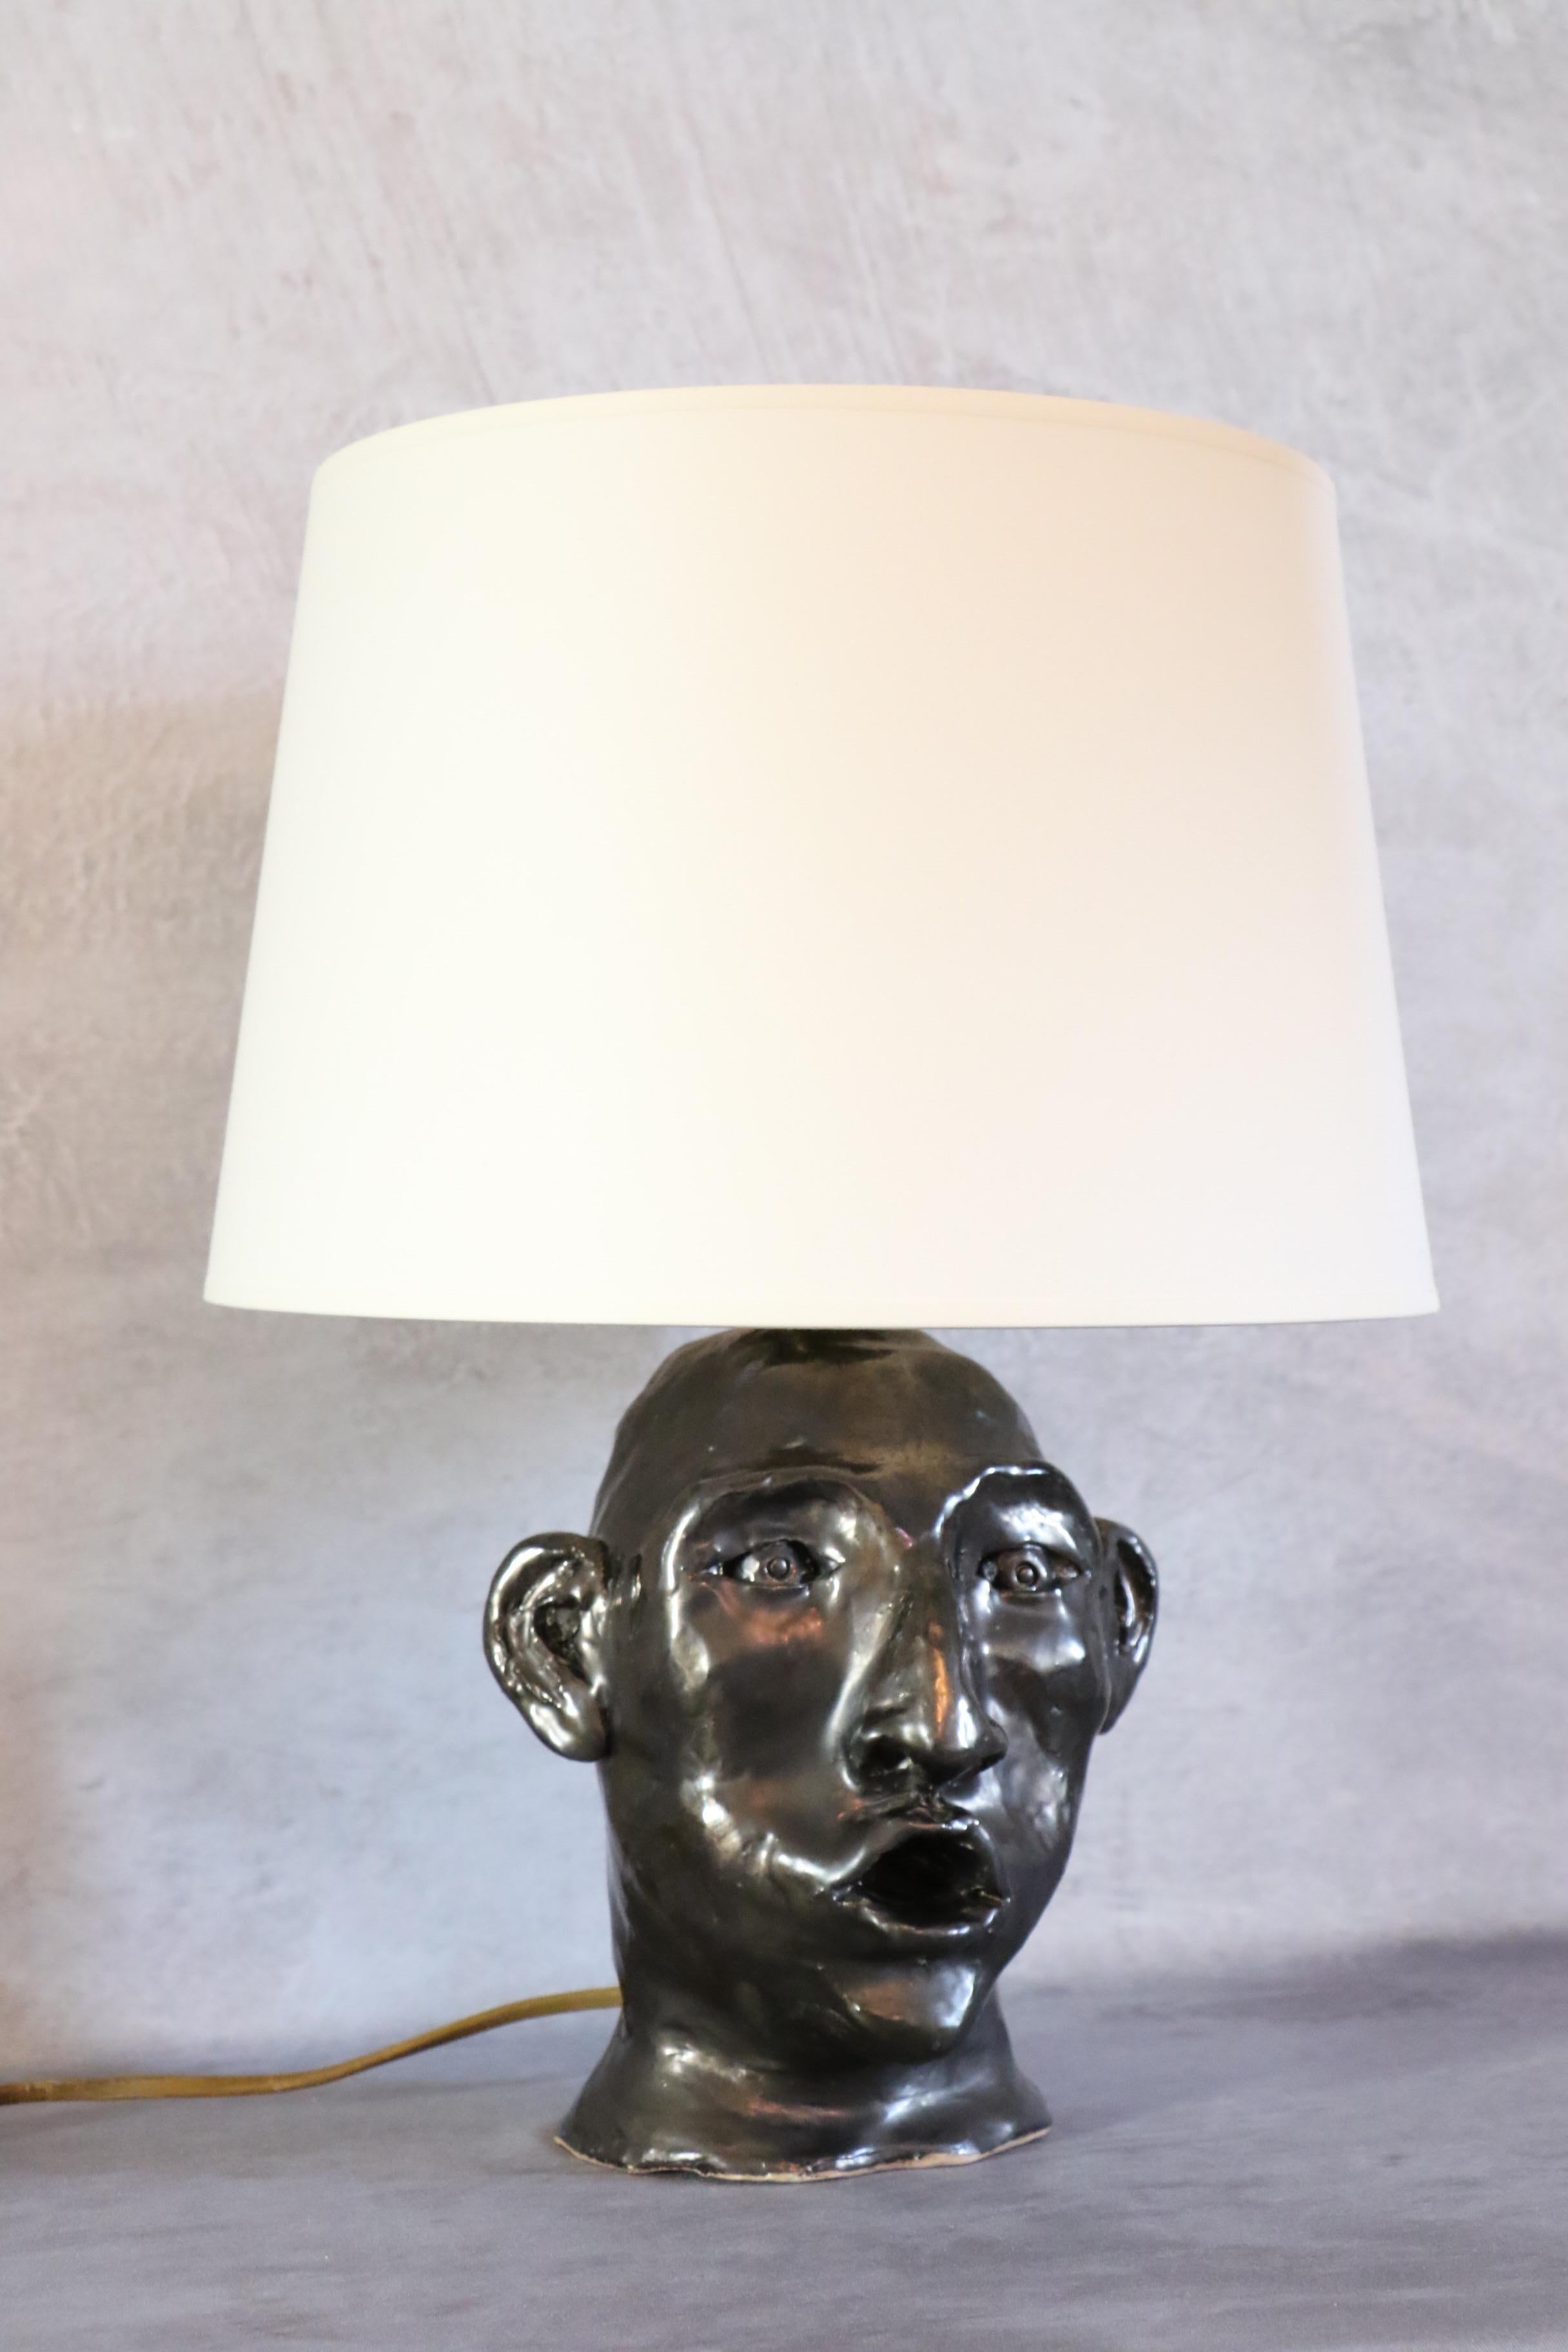 1950s French ceramic lamp with face decoration in the style of Georges Jouve

A stoneware lamp, its lustrous black enamel recalls the work of Georges Jouve or the Cloutier brothers.  
From the 1950s - 60s, the lamp is signed. A magnificent piece. A